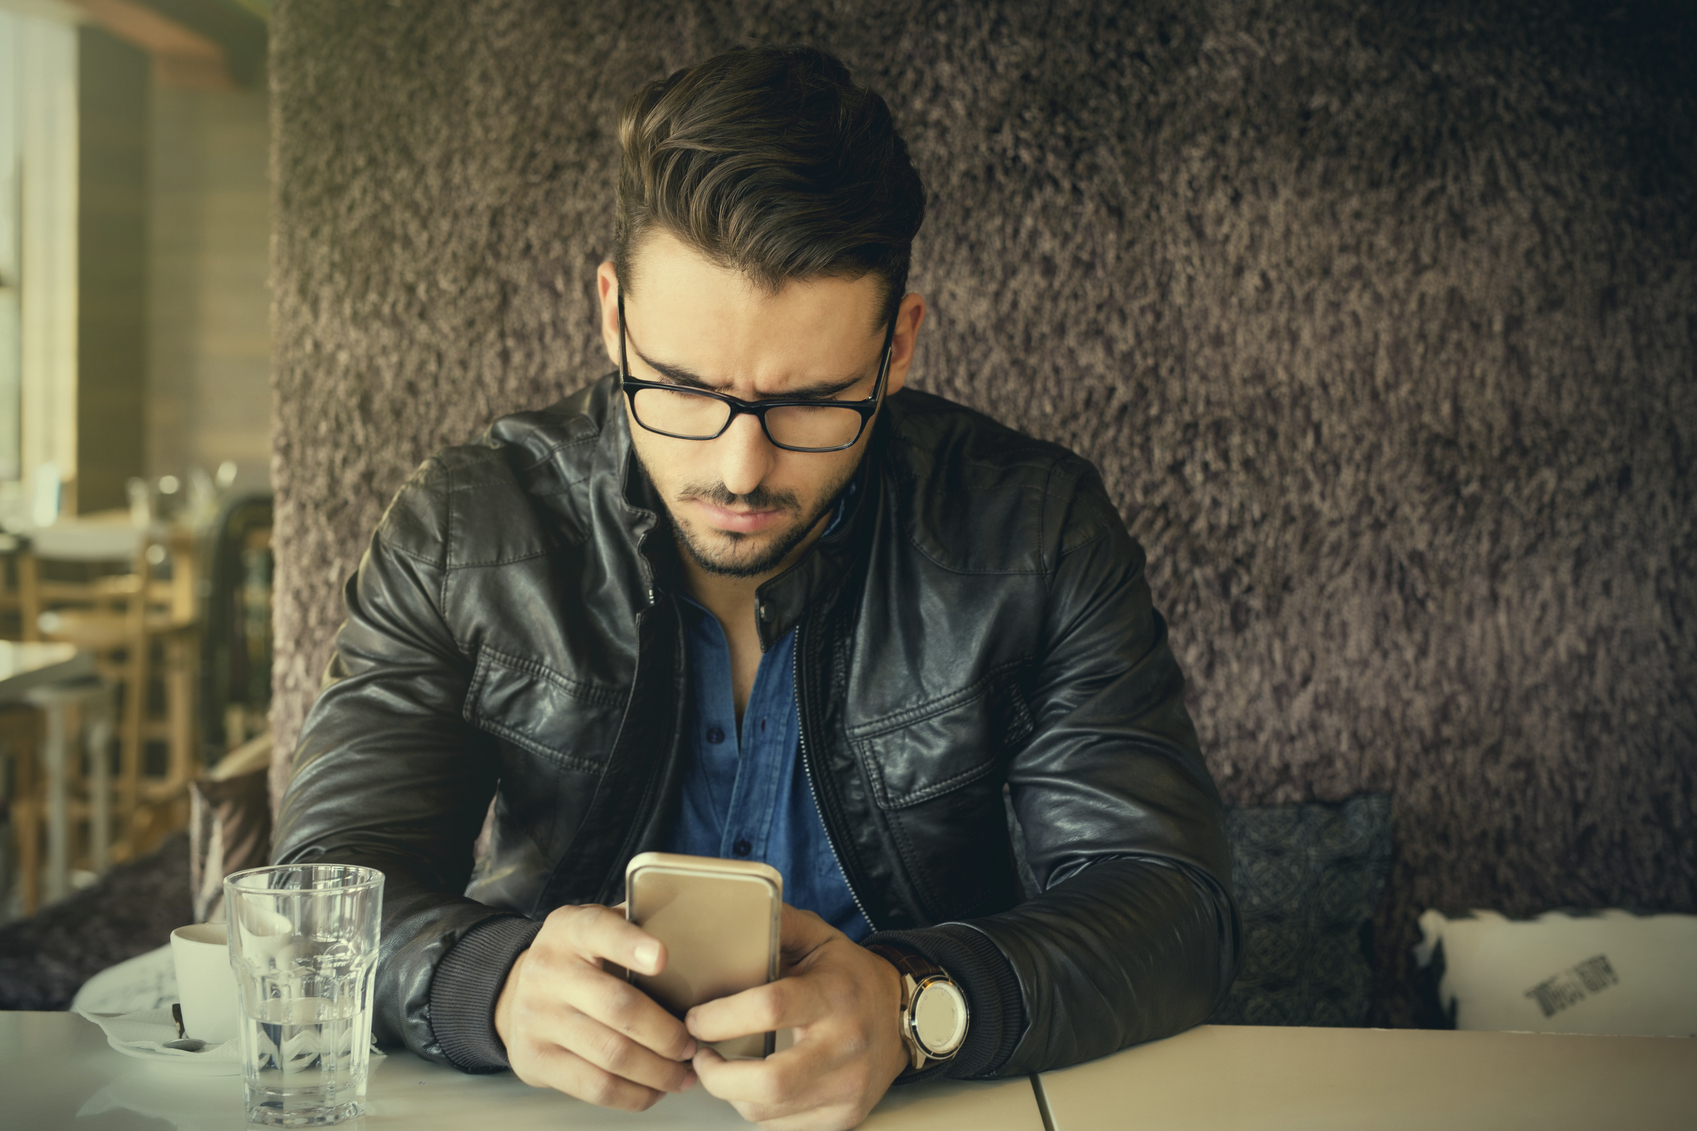 Handsome man with eyeglasses and leather jacket using smartphone